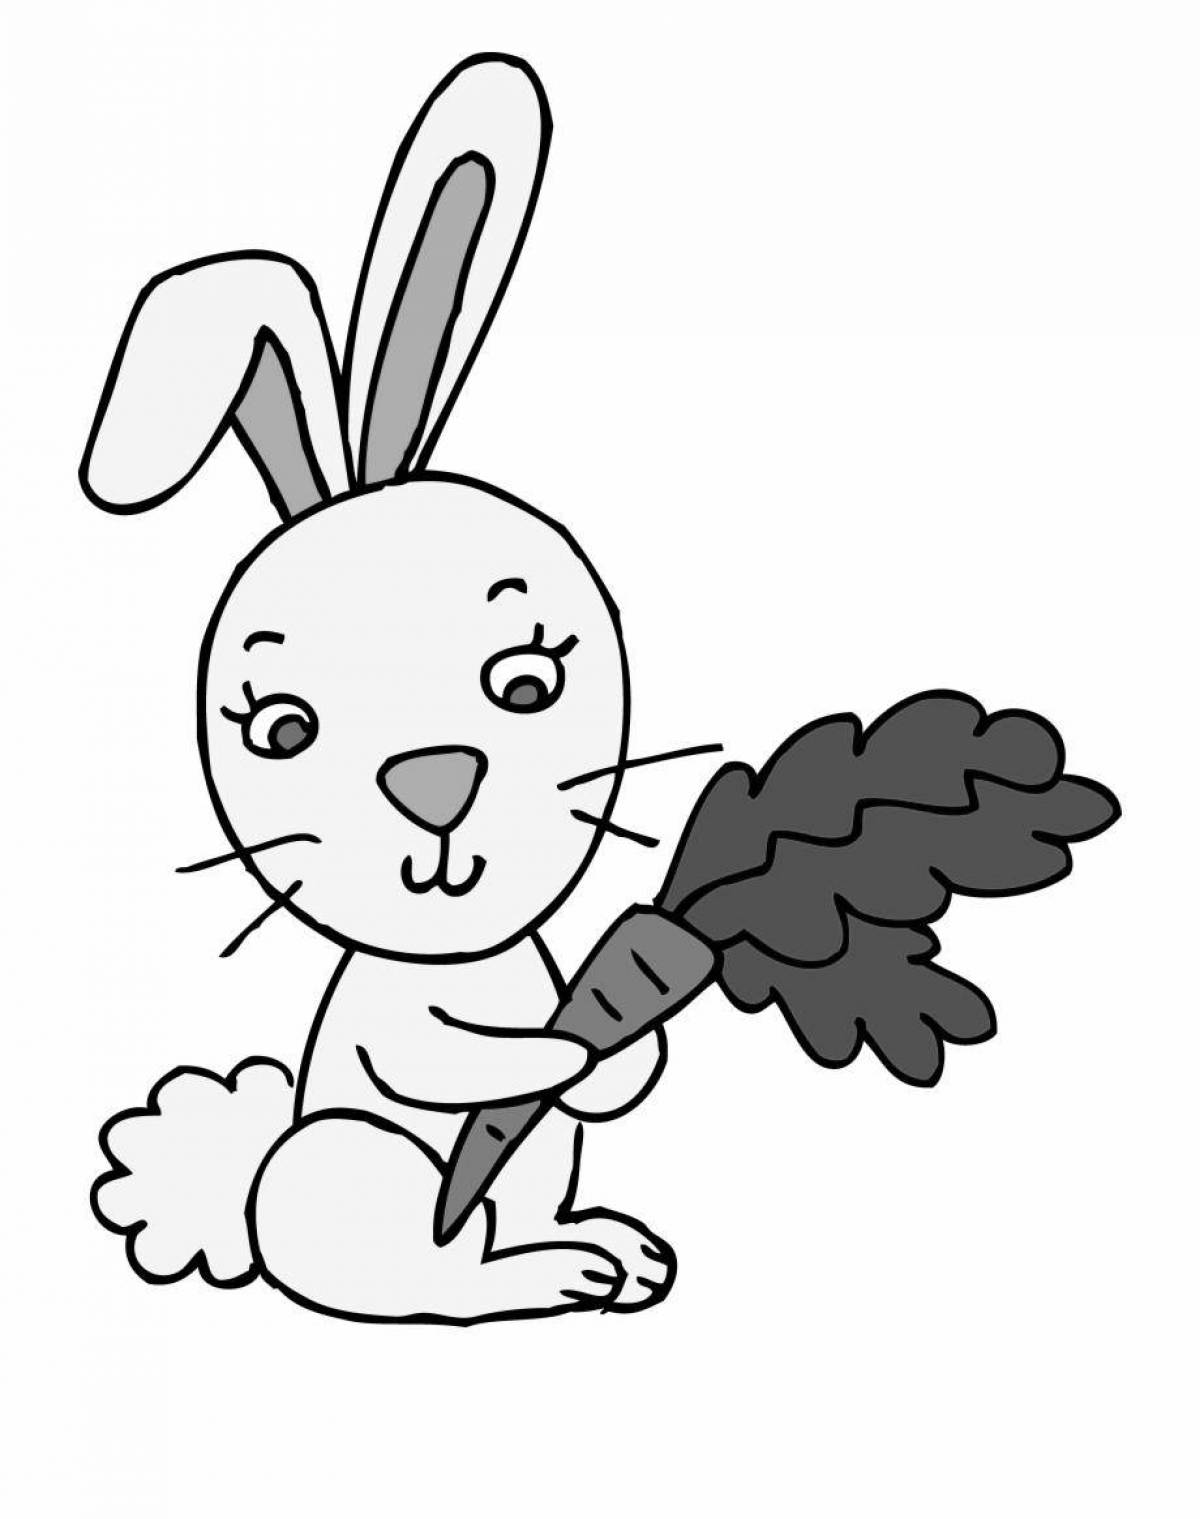 Coloring page of an attractive hare with a carrot